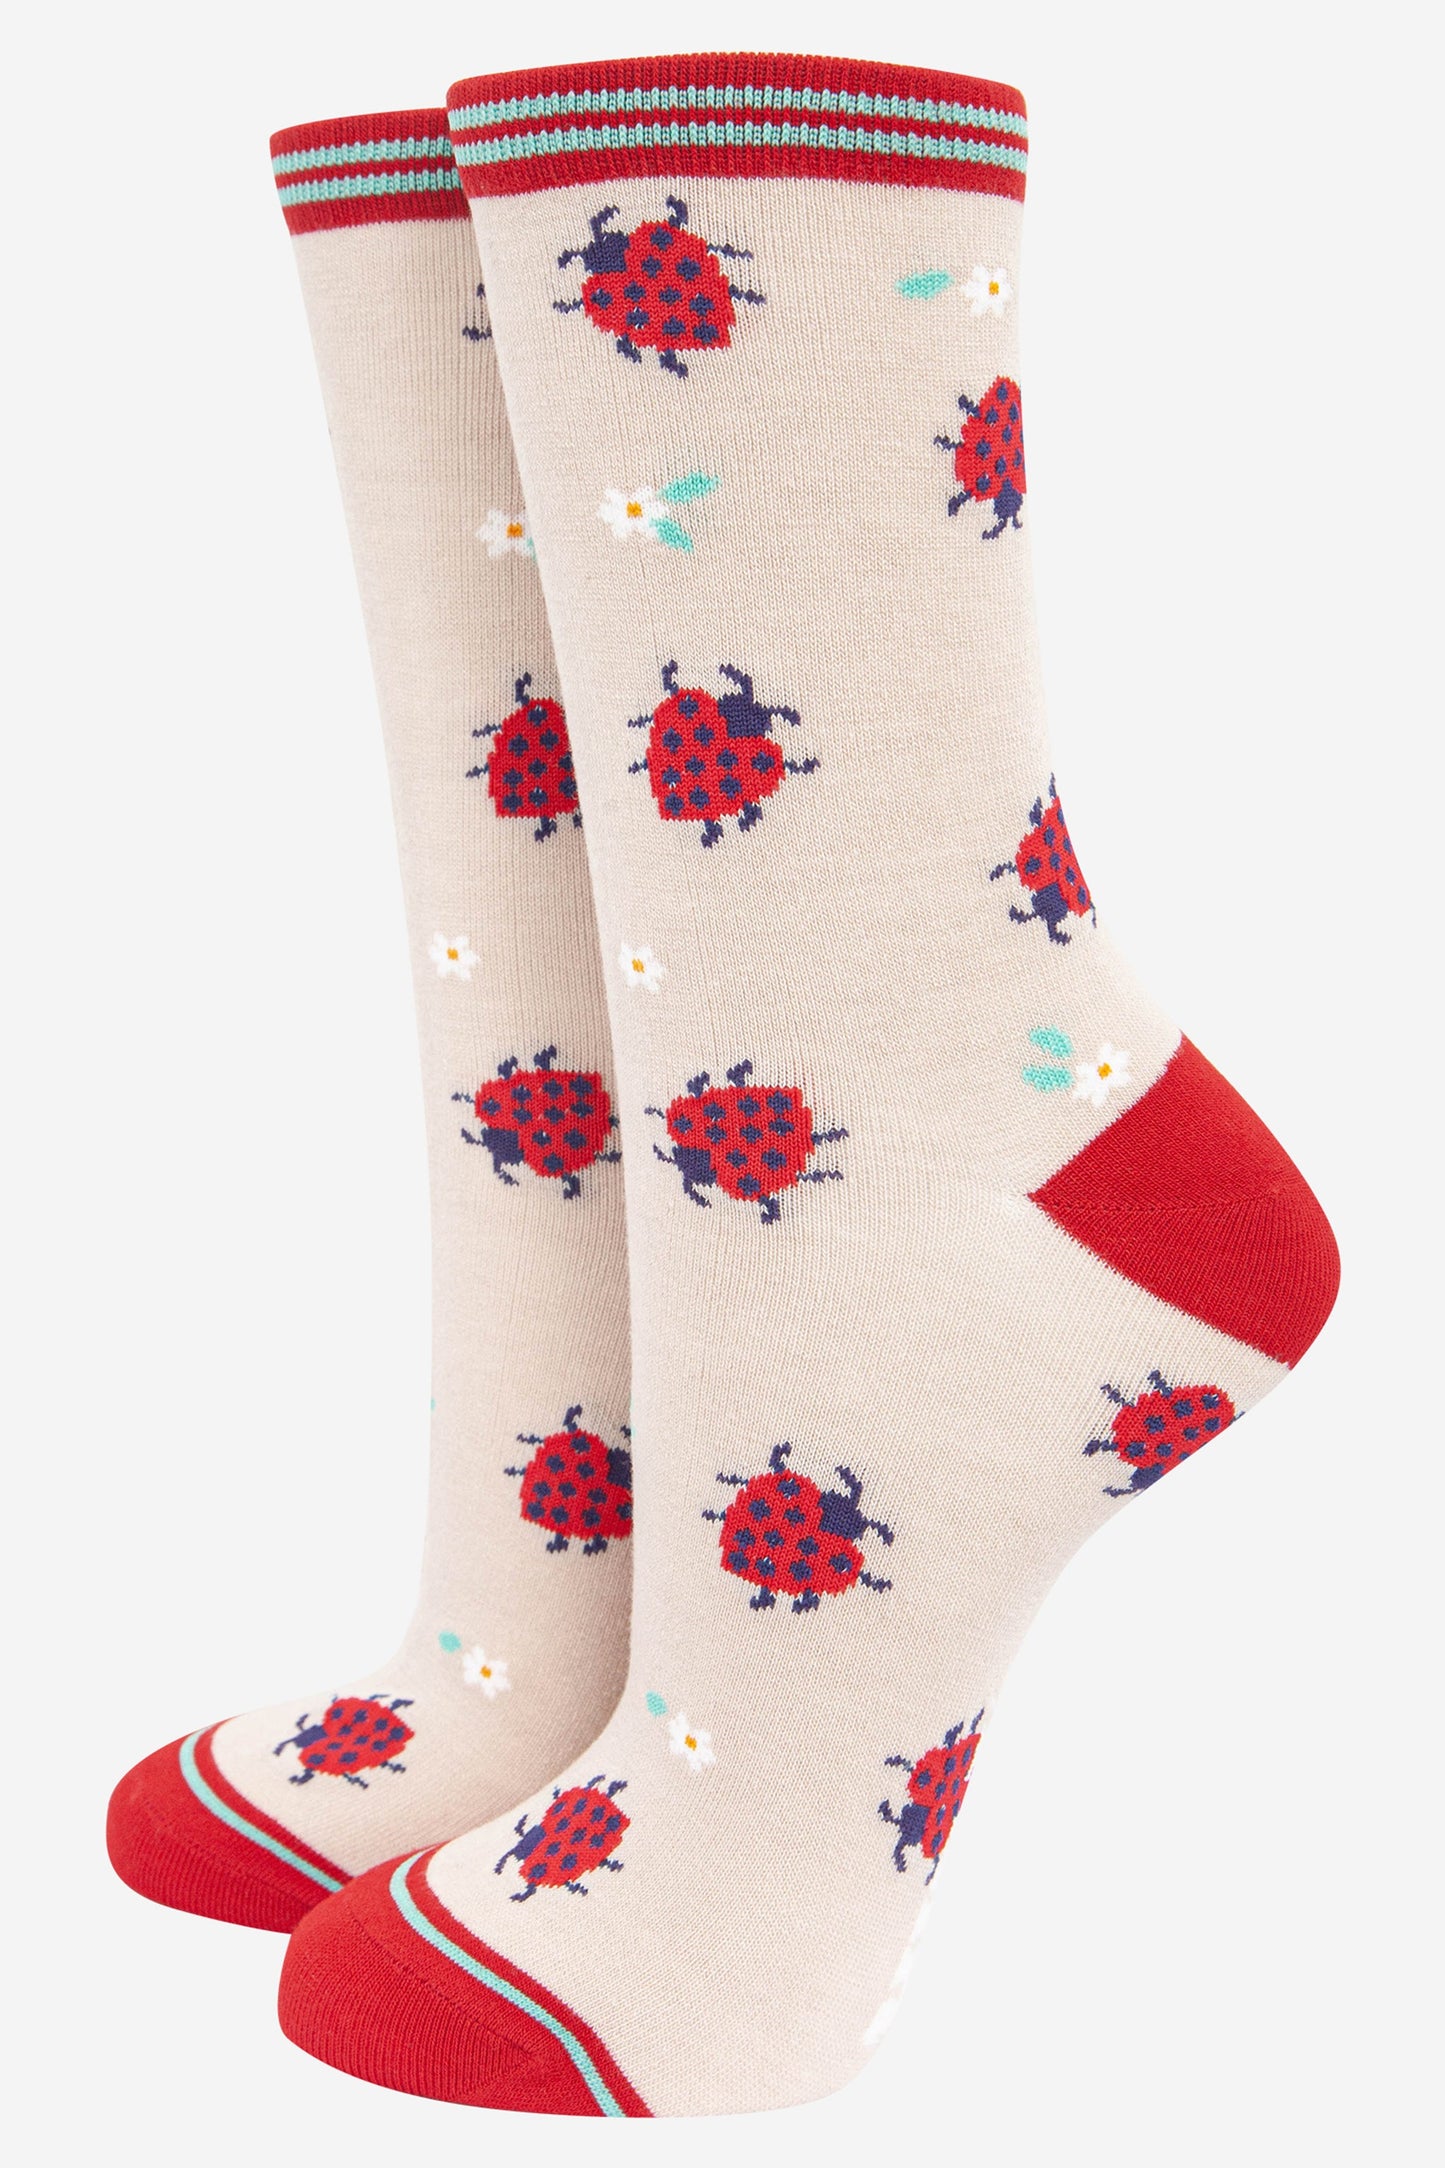 cream and red bamboo ankle socks with a pattern of red heart shaped lady bugs and daisies